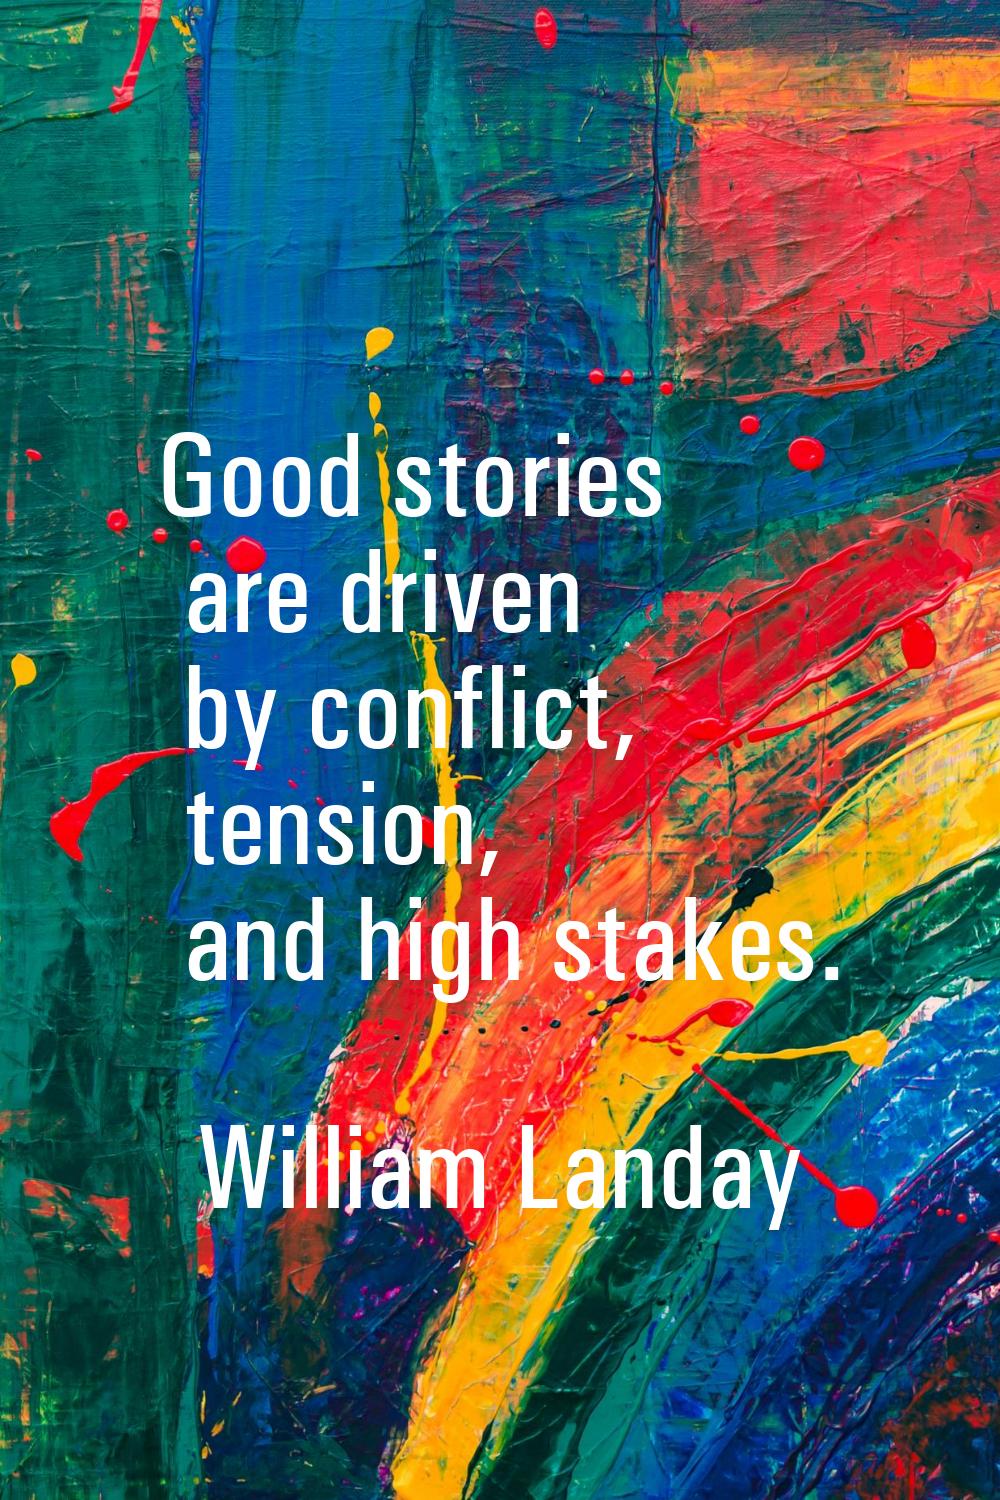 Good stories are driven by conflict, tension, and high stakes.